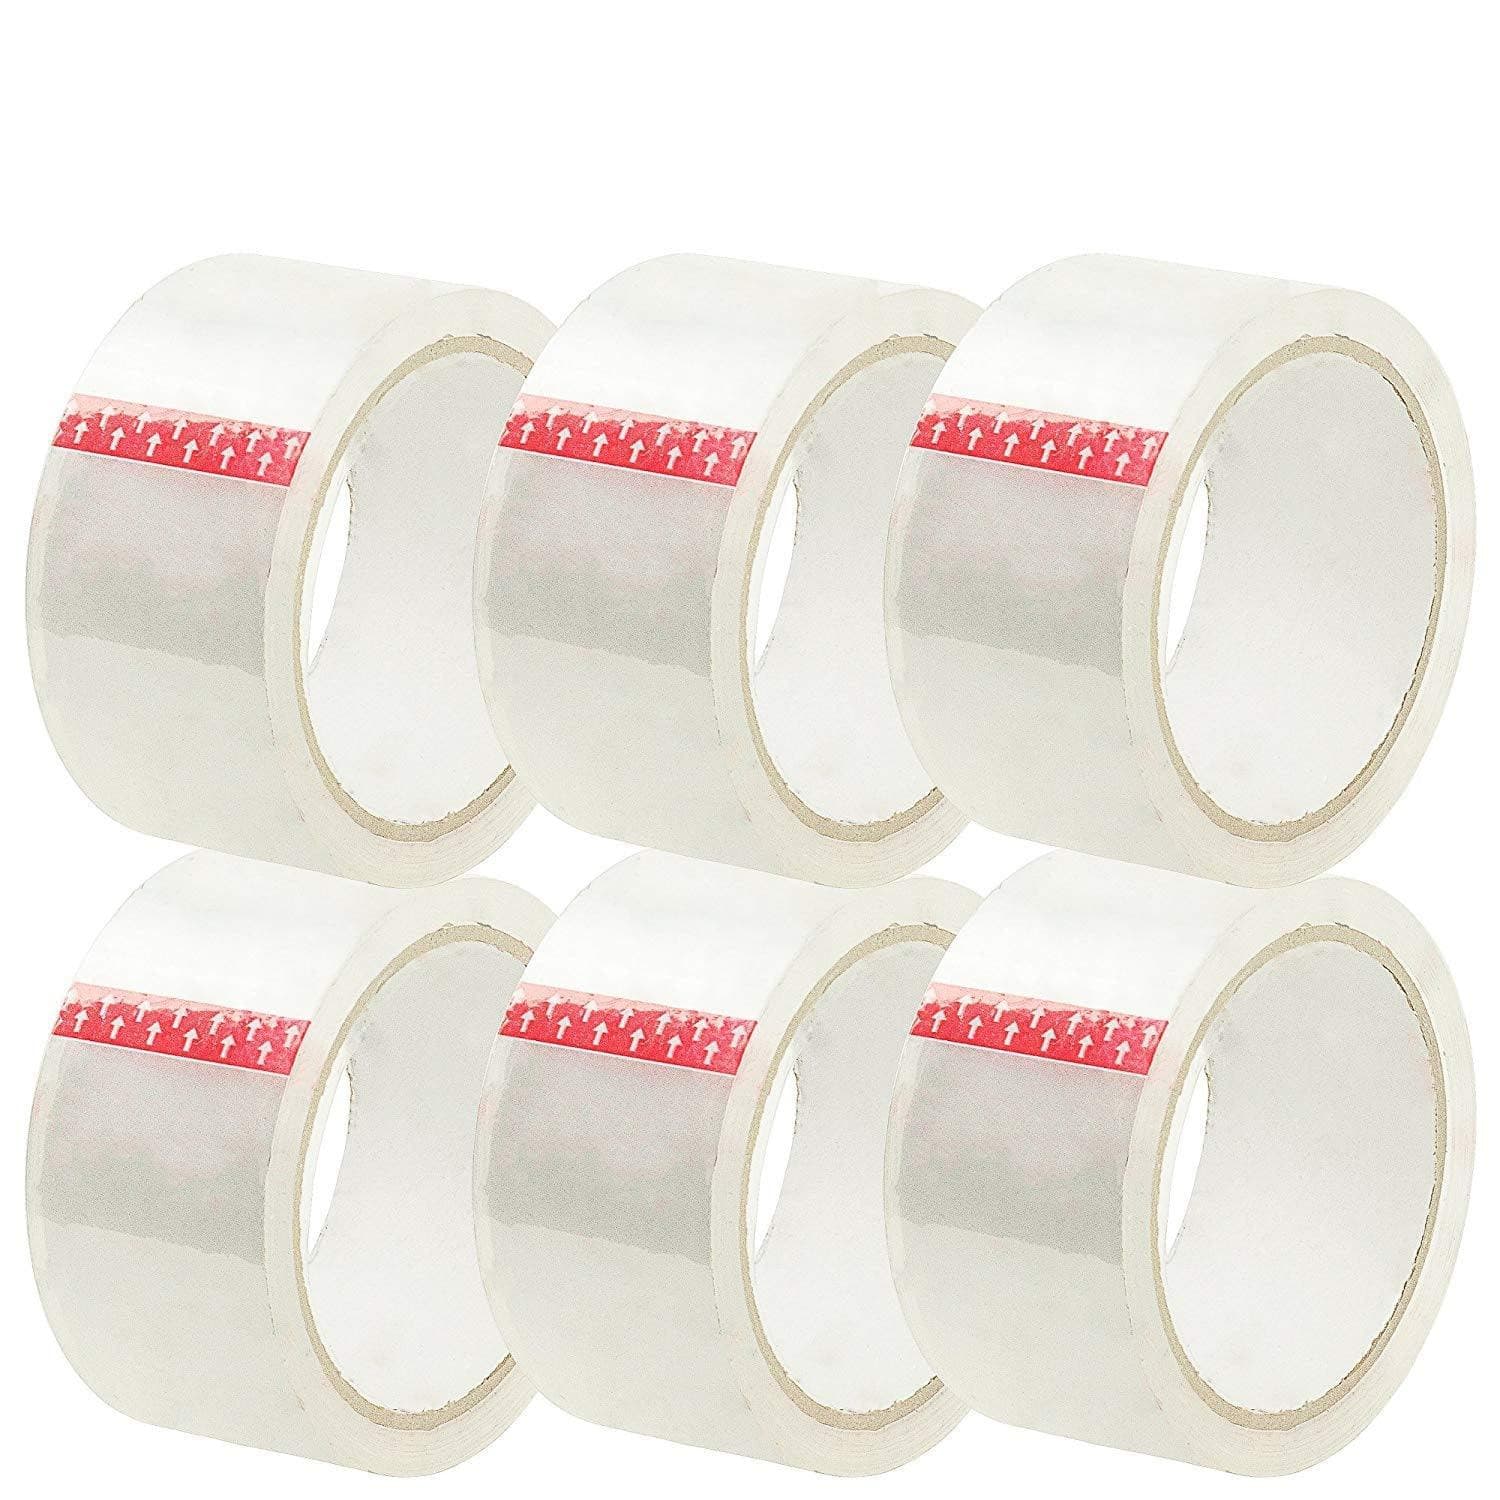 36x Clear Packing Tape Sticky Rolls Adhesive Tapes | 48mm x 75m | Value Pack - Office Catch